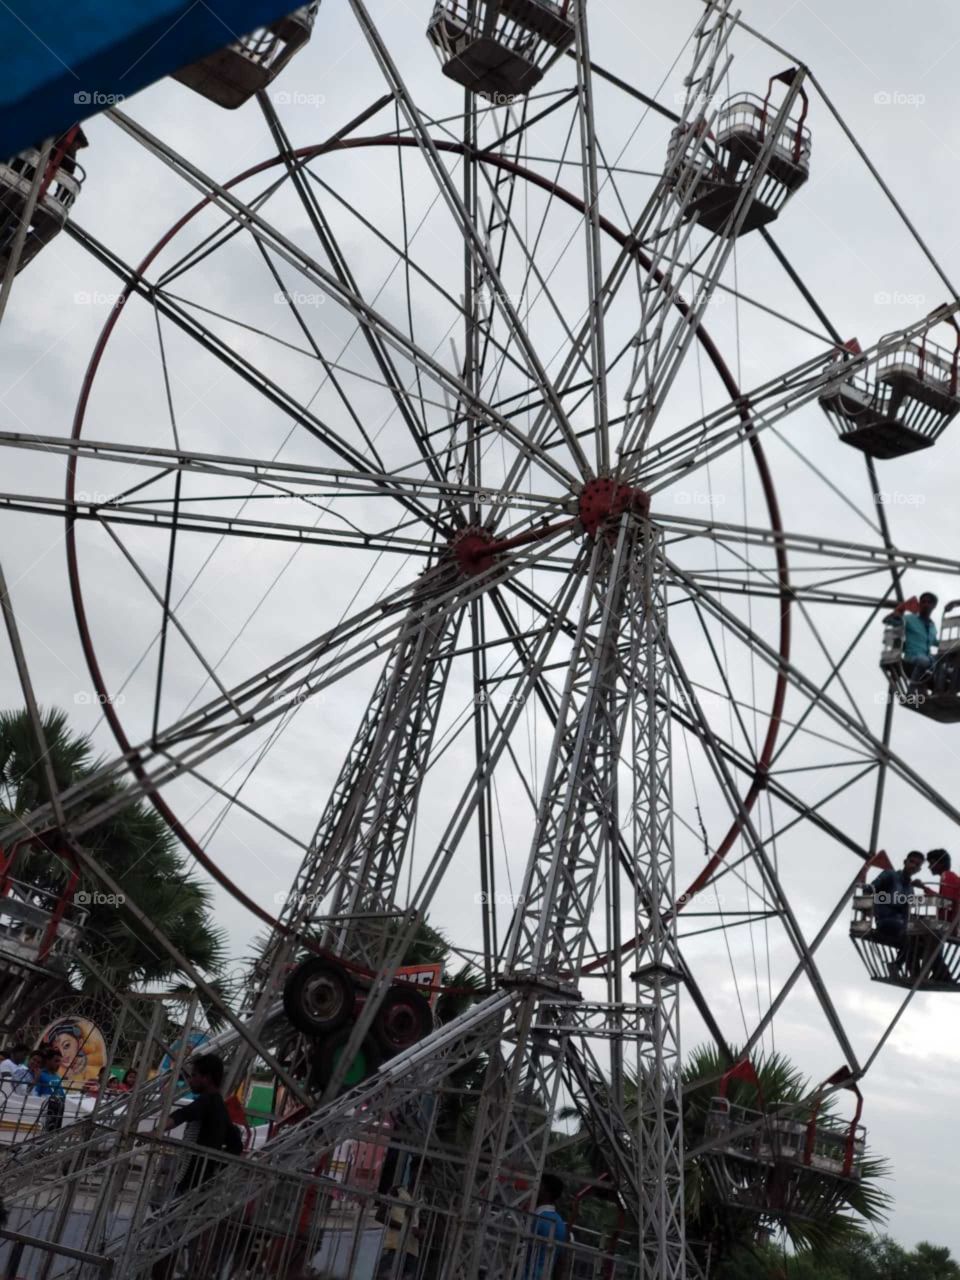 Our friendship is like a Ferris wheel it keeps on going no matter what ever happiness in life. Yes we have our ups and downs but we always come to through for each other at the end.😢😢😢
I'm just one feel this sad moment....